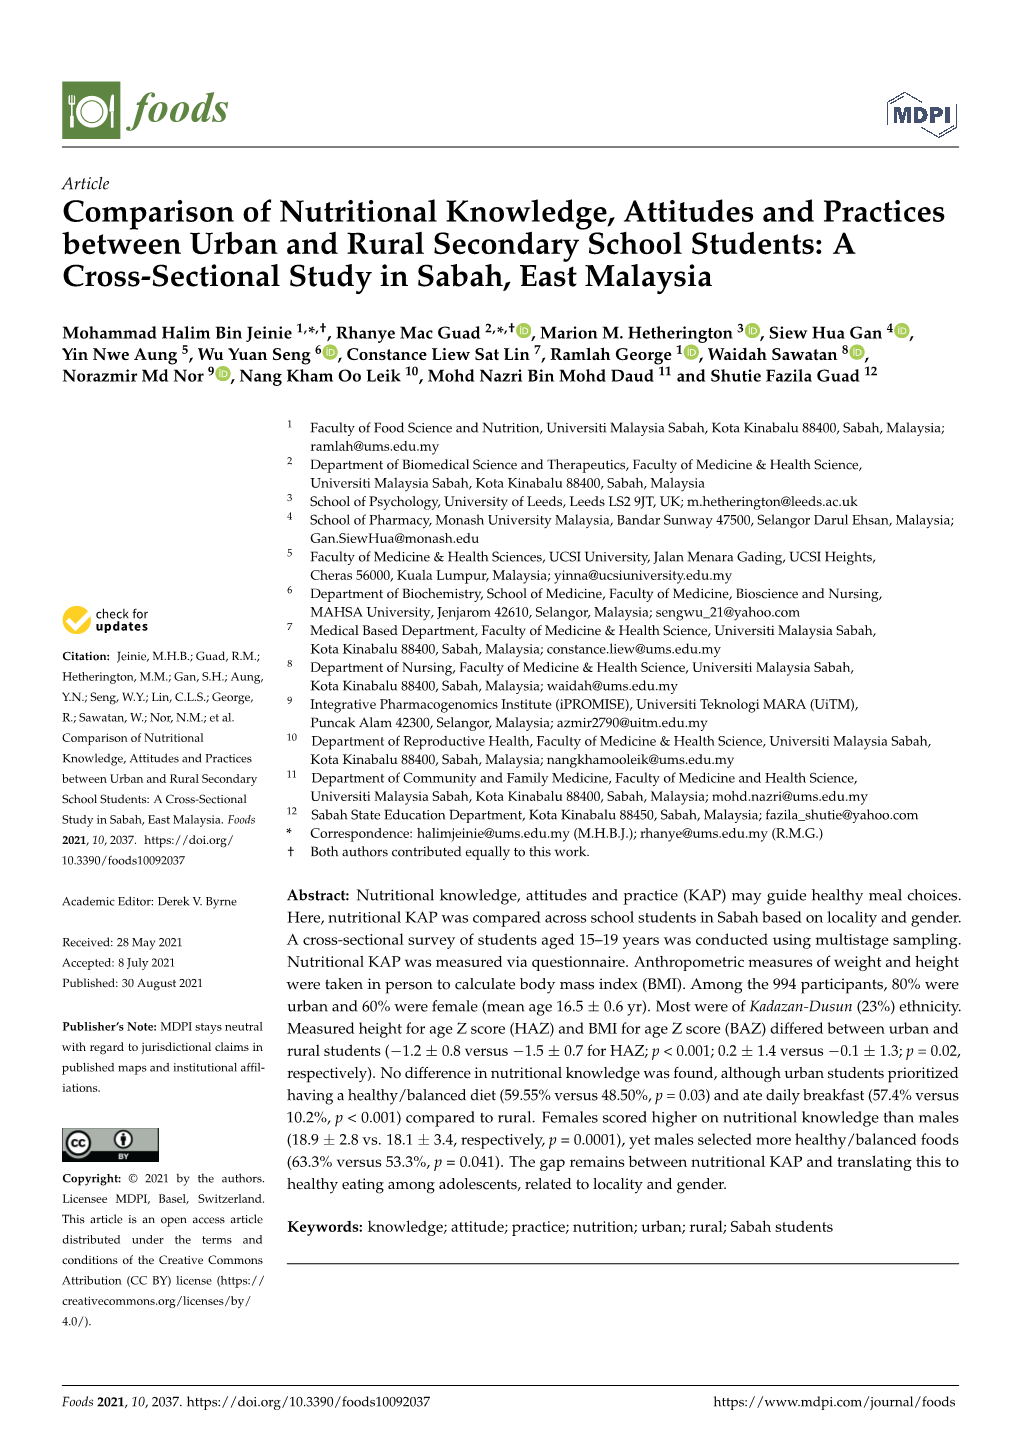 Comparison of Nutritional Knowledge, Attitudes and Practices Between Urban and Rural Secondary School Students: a Cross-Sectional Study in Sabah, East Malaysia